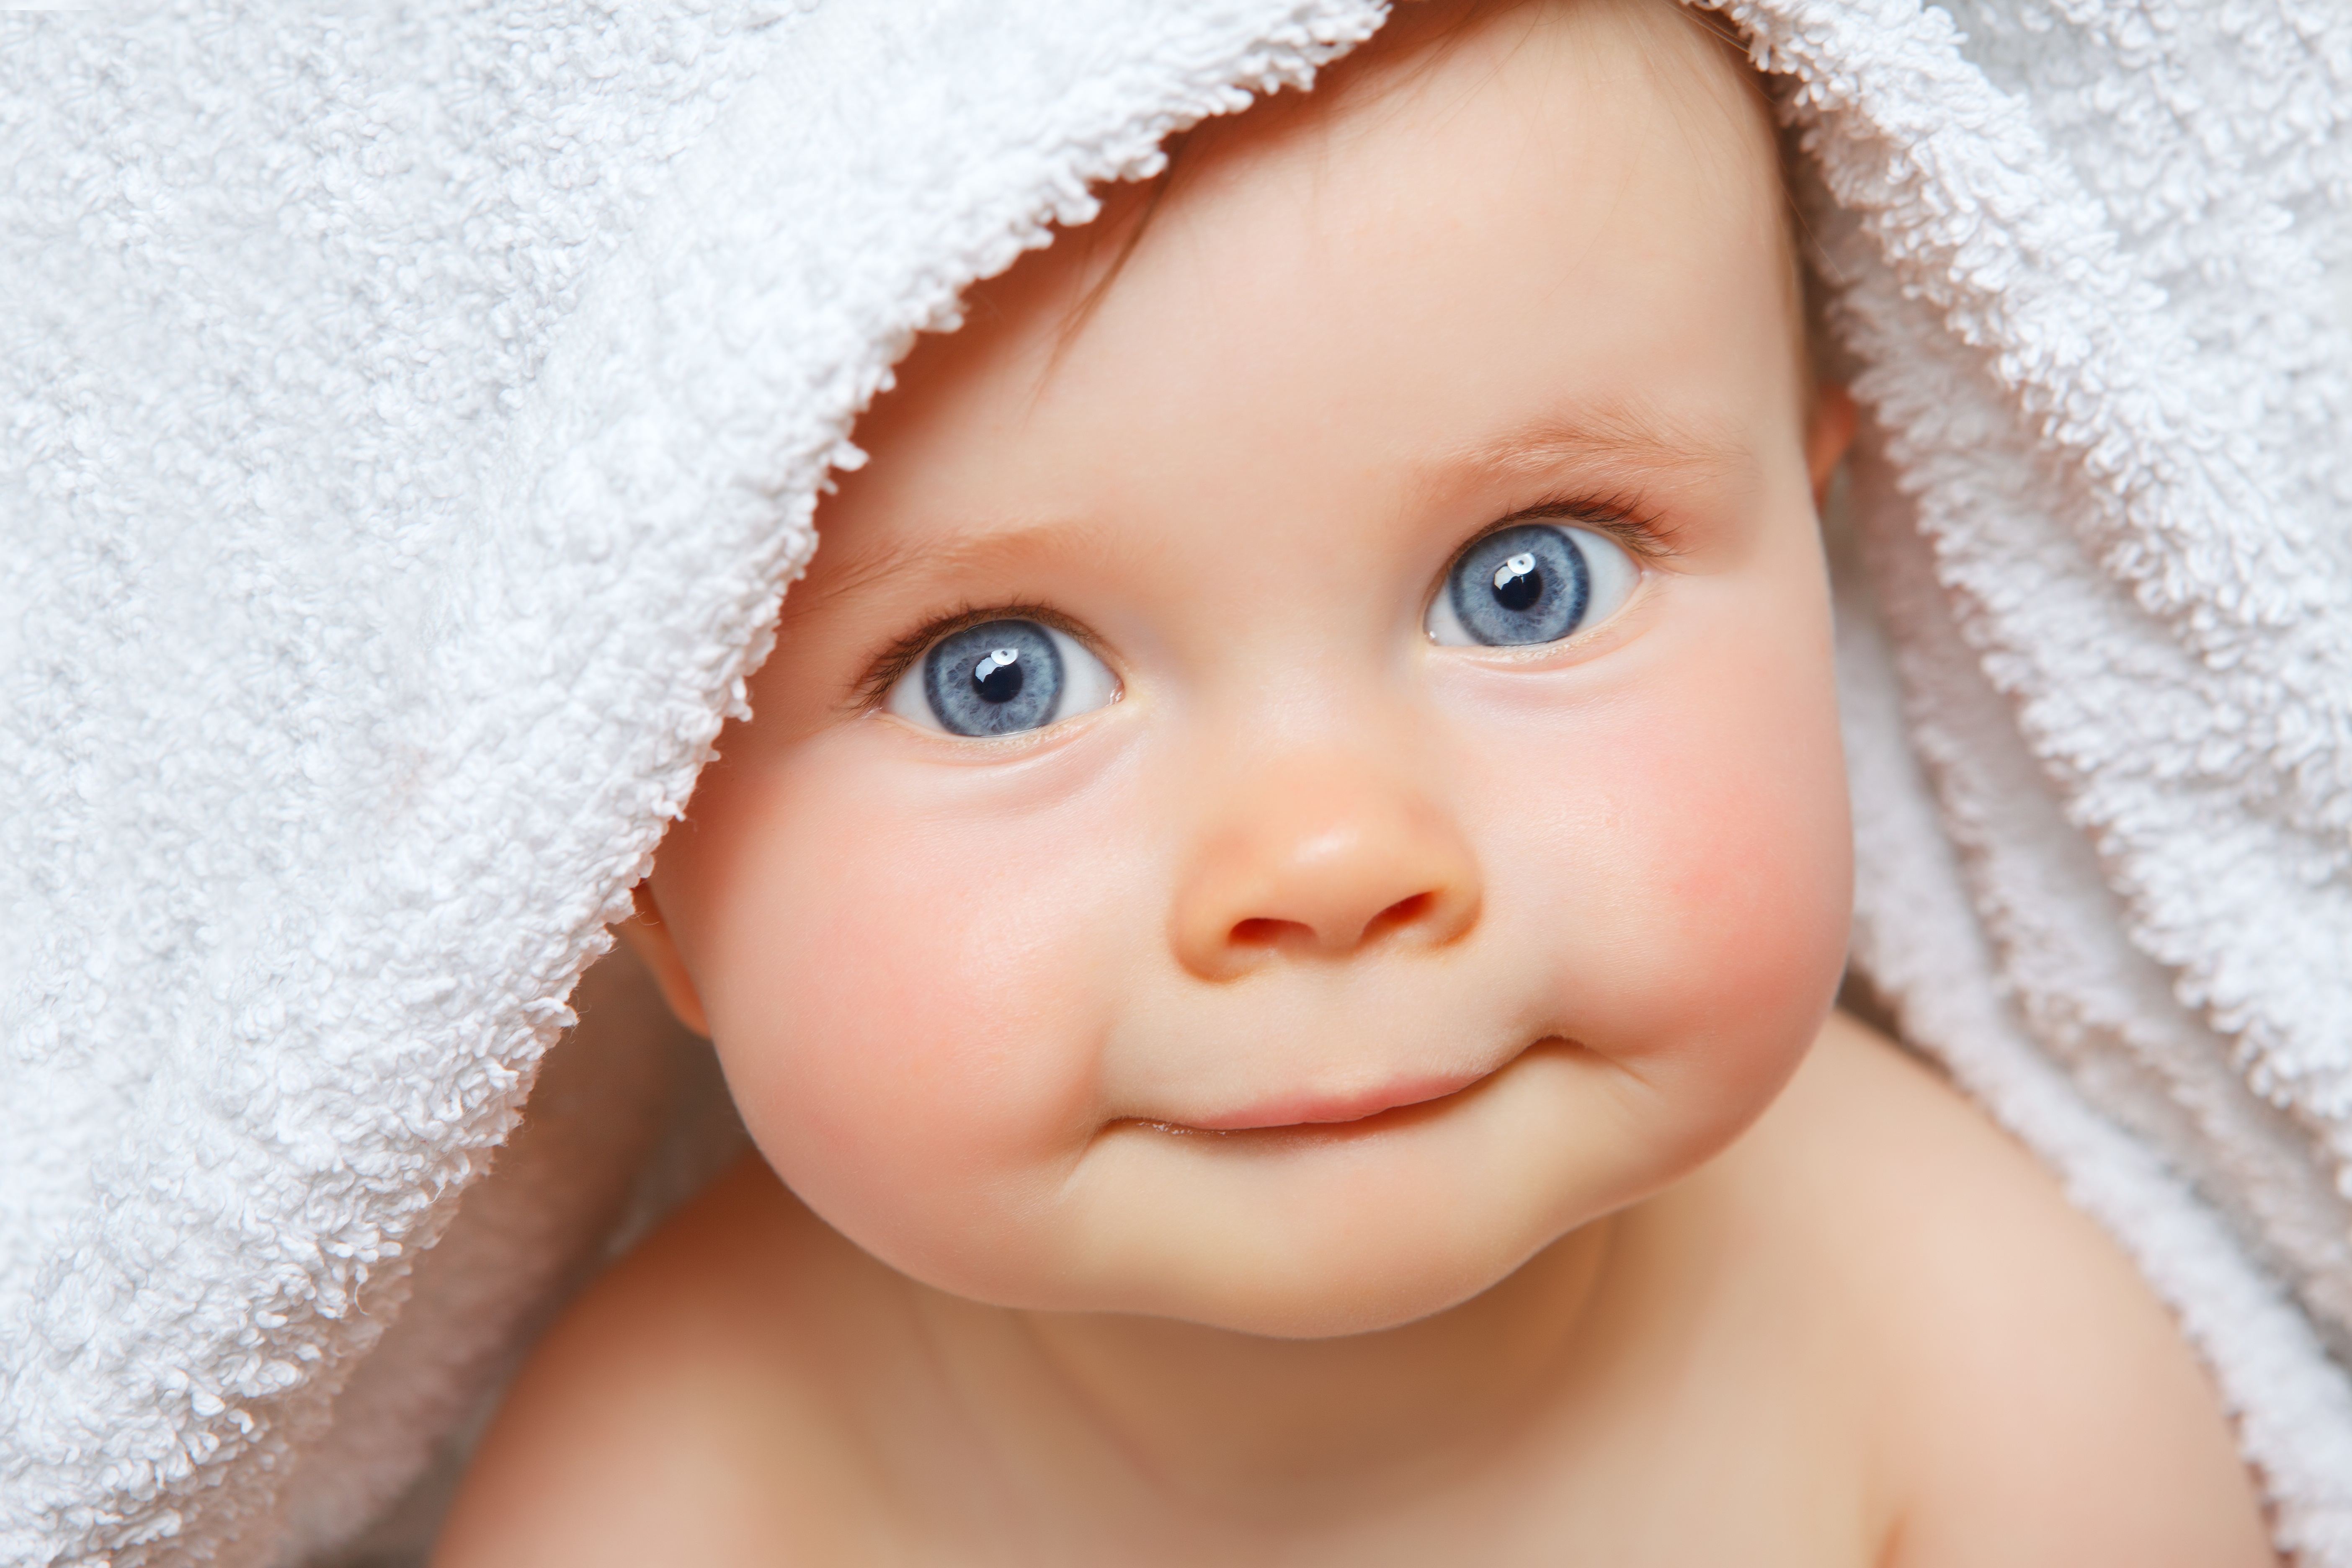 Cute baby wants to enter the Gerber Baby Contest